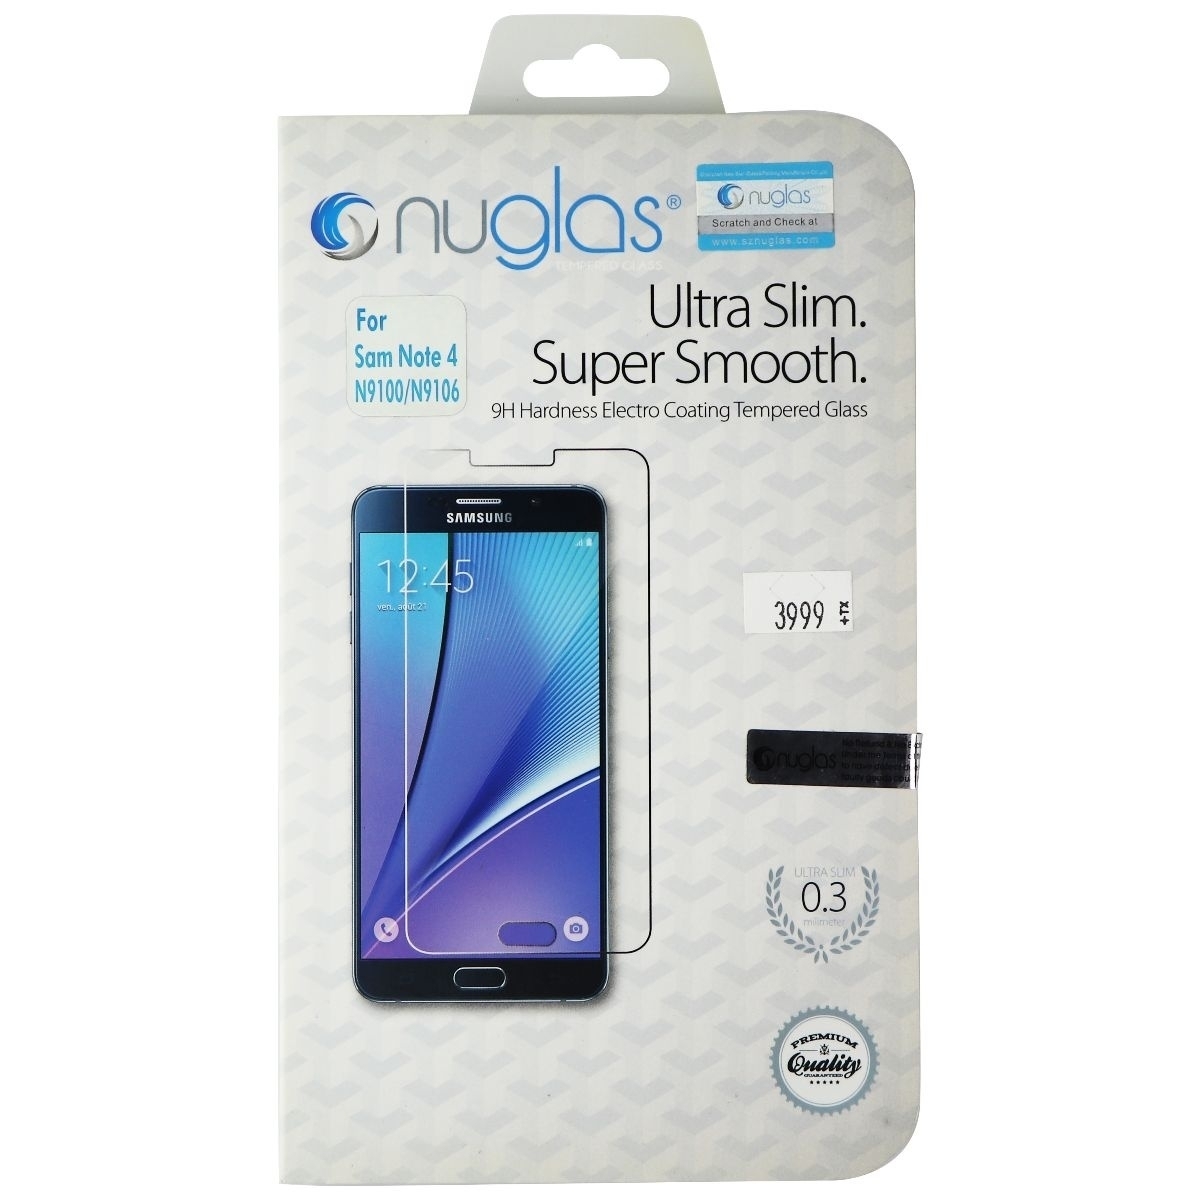 NuGlas Tempered Glass Screen Protector For Samsung Note 4 - Clear